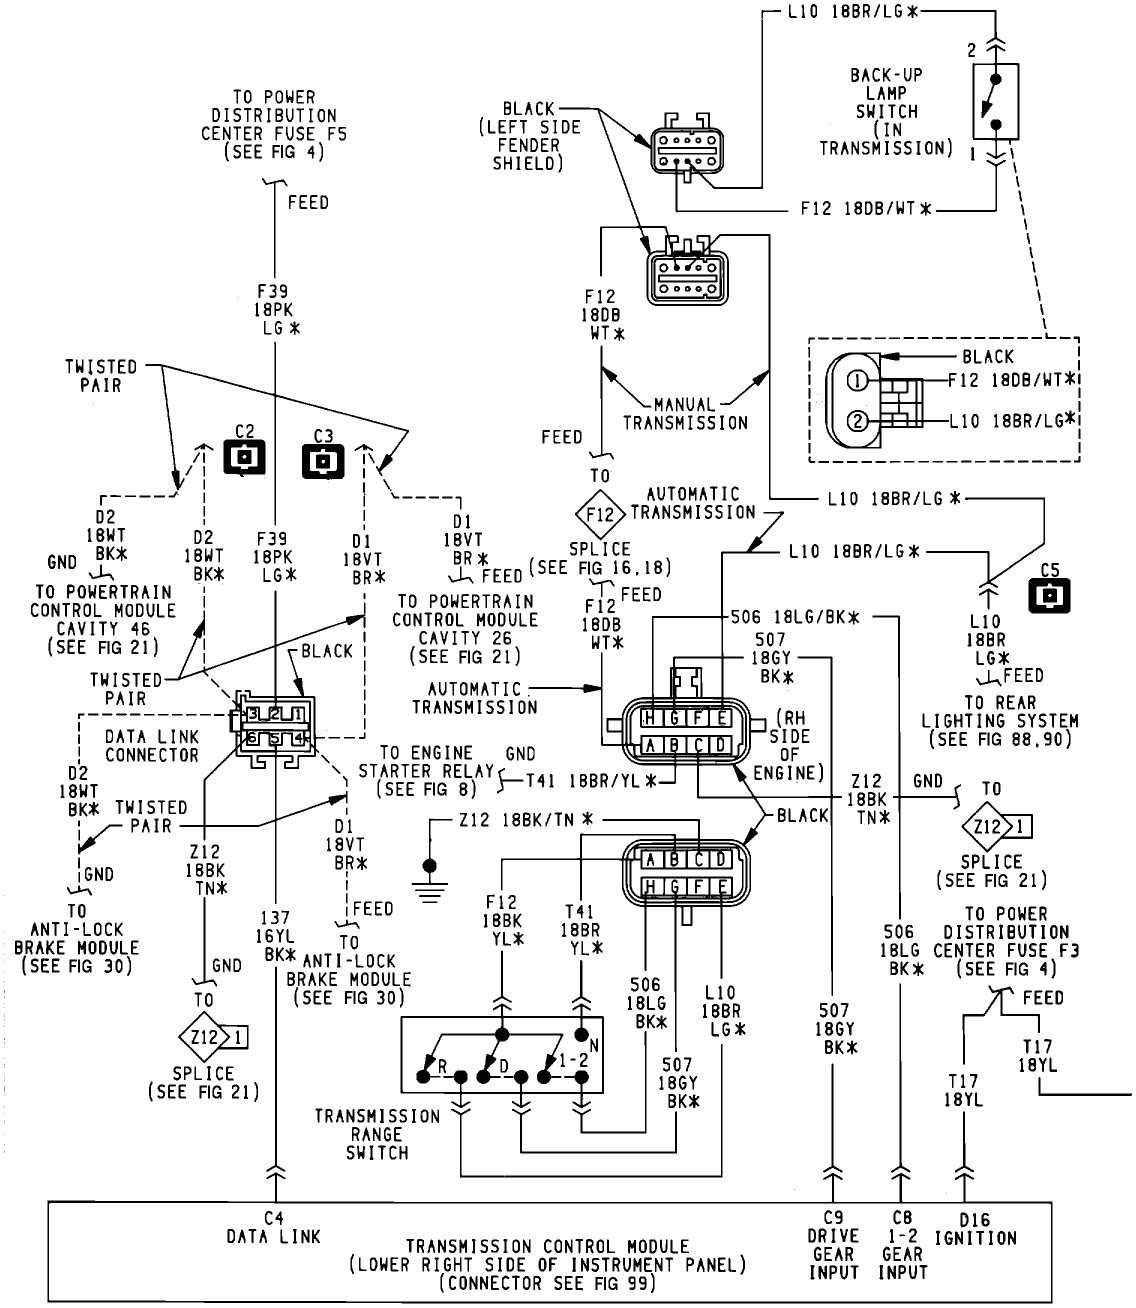 wiring diagrahm for a jeep 2 5 wiring diagram used95 jeep wrangler 2 5 engine diagram